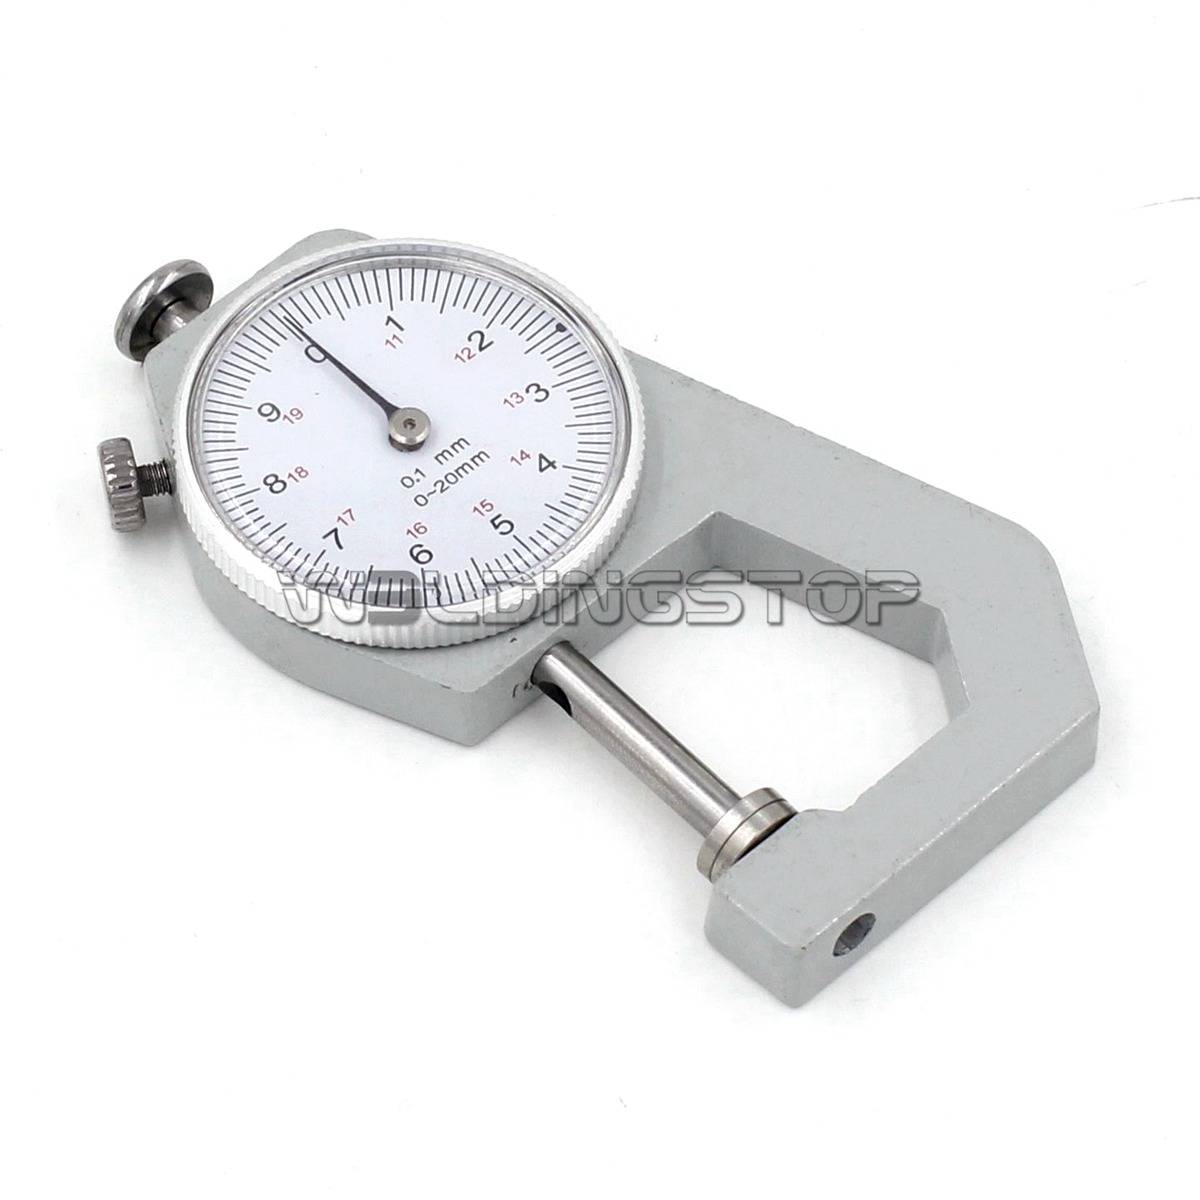 0.1mm Precision Dial Pocket Tip Head Thickness Gauge Gage Measuring Tool 0-20mm 